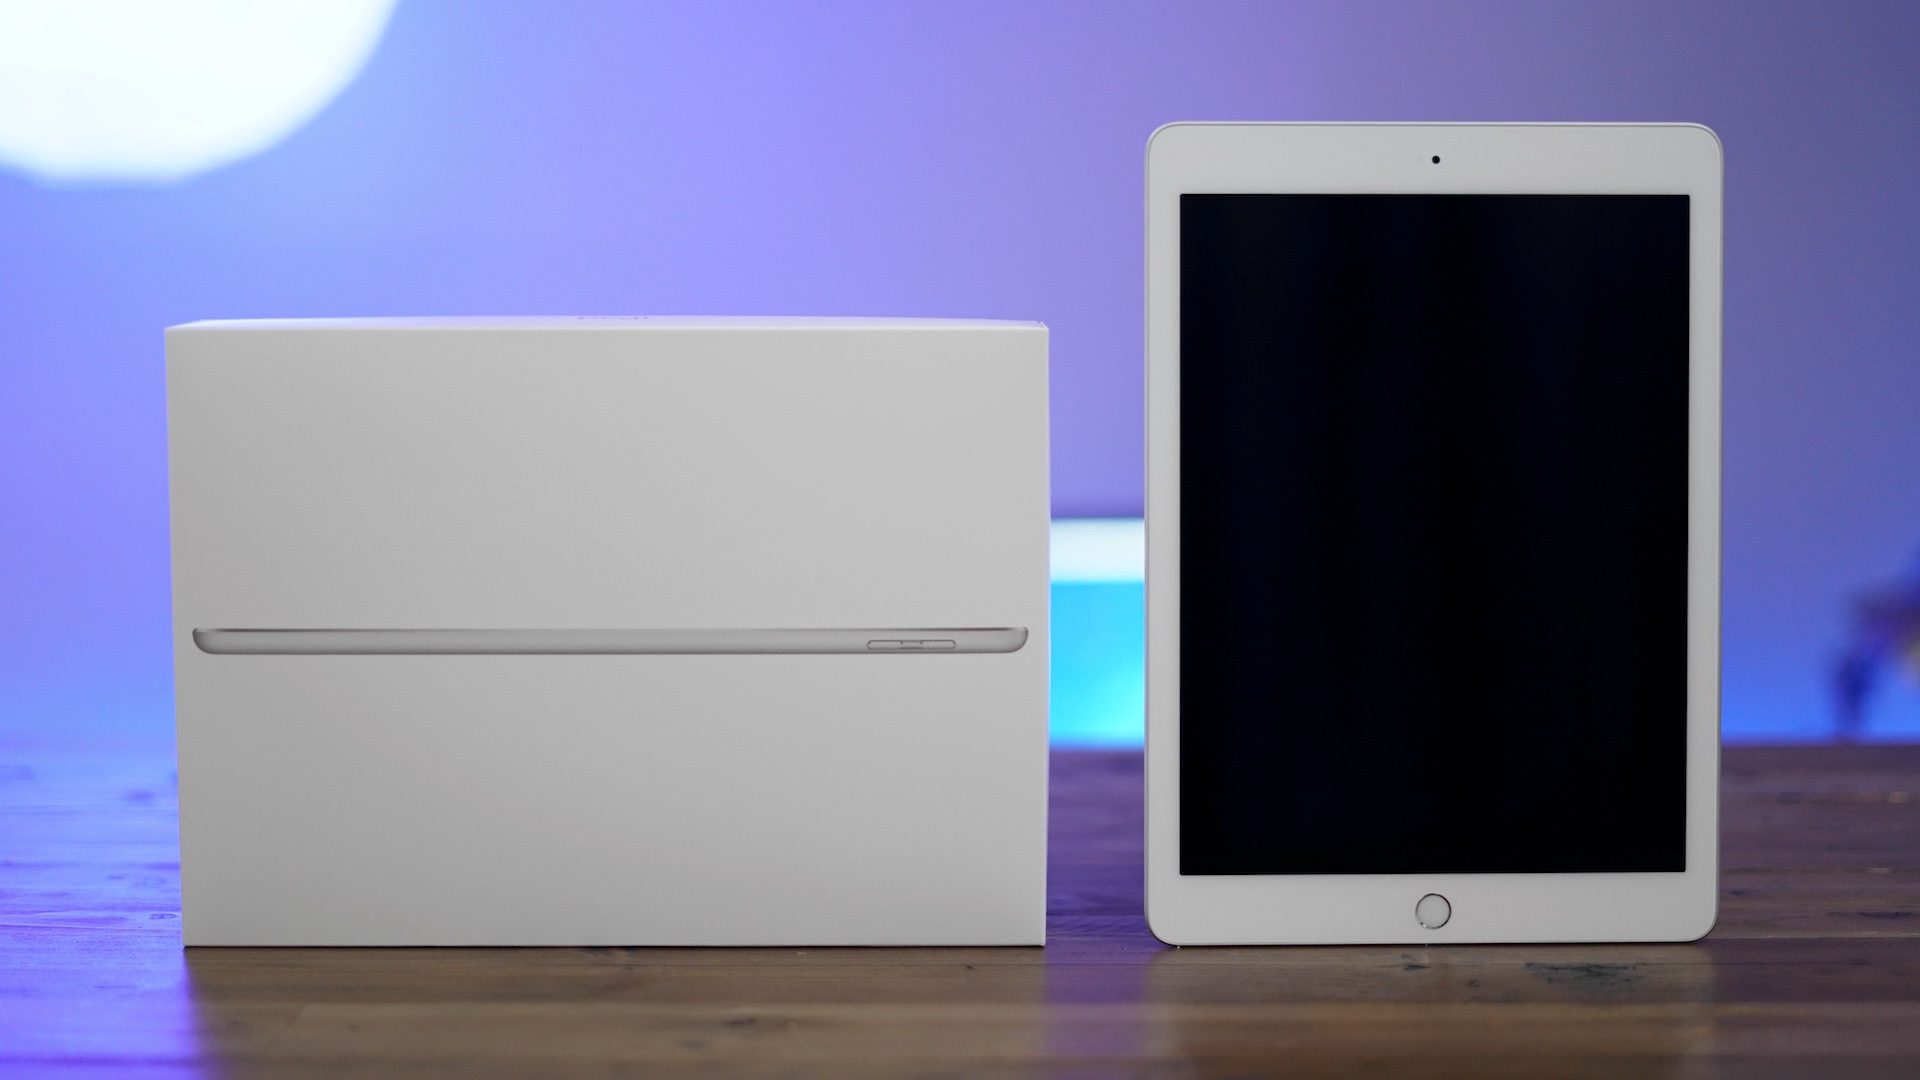 Review: Apple's $329 iPad is not without compromise, but a